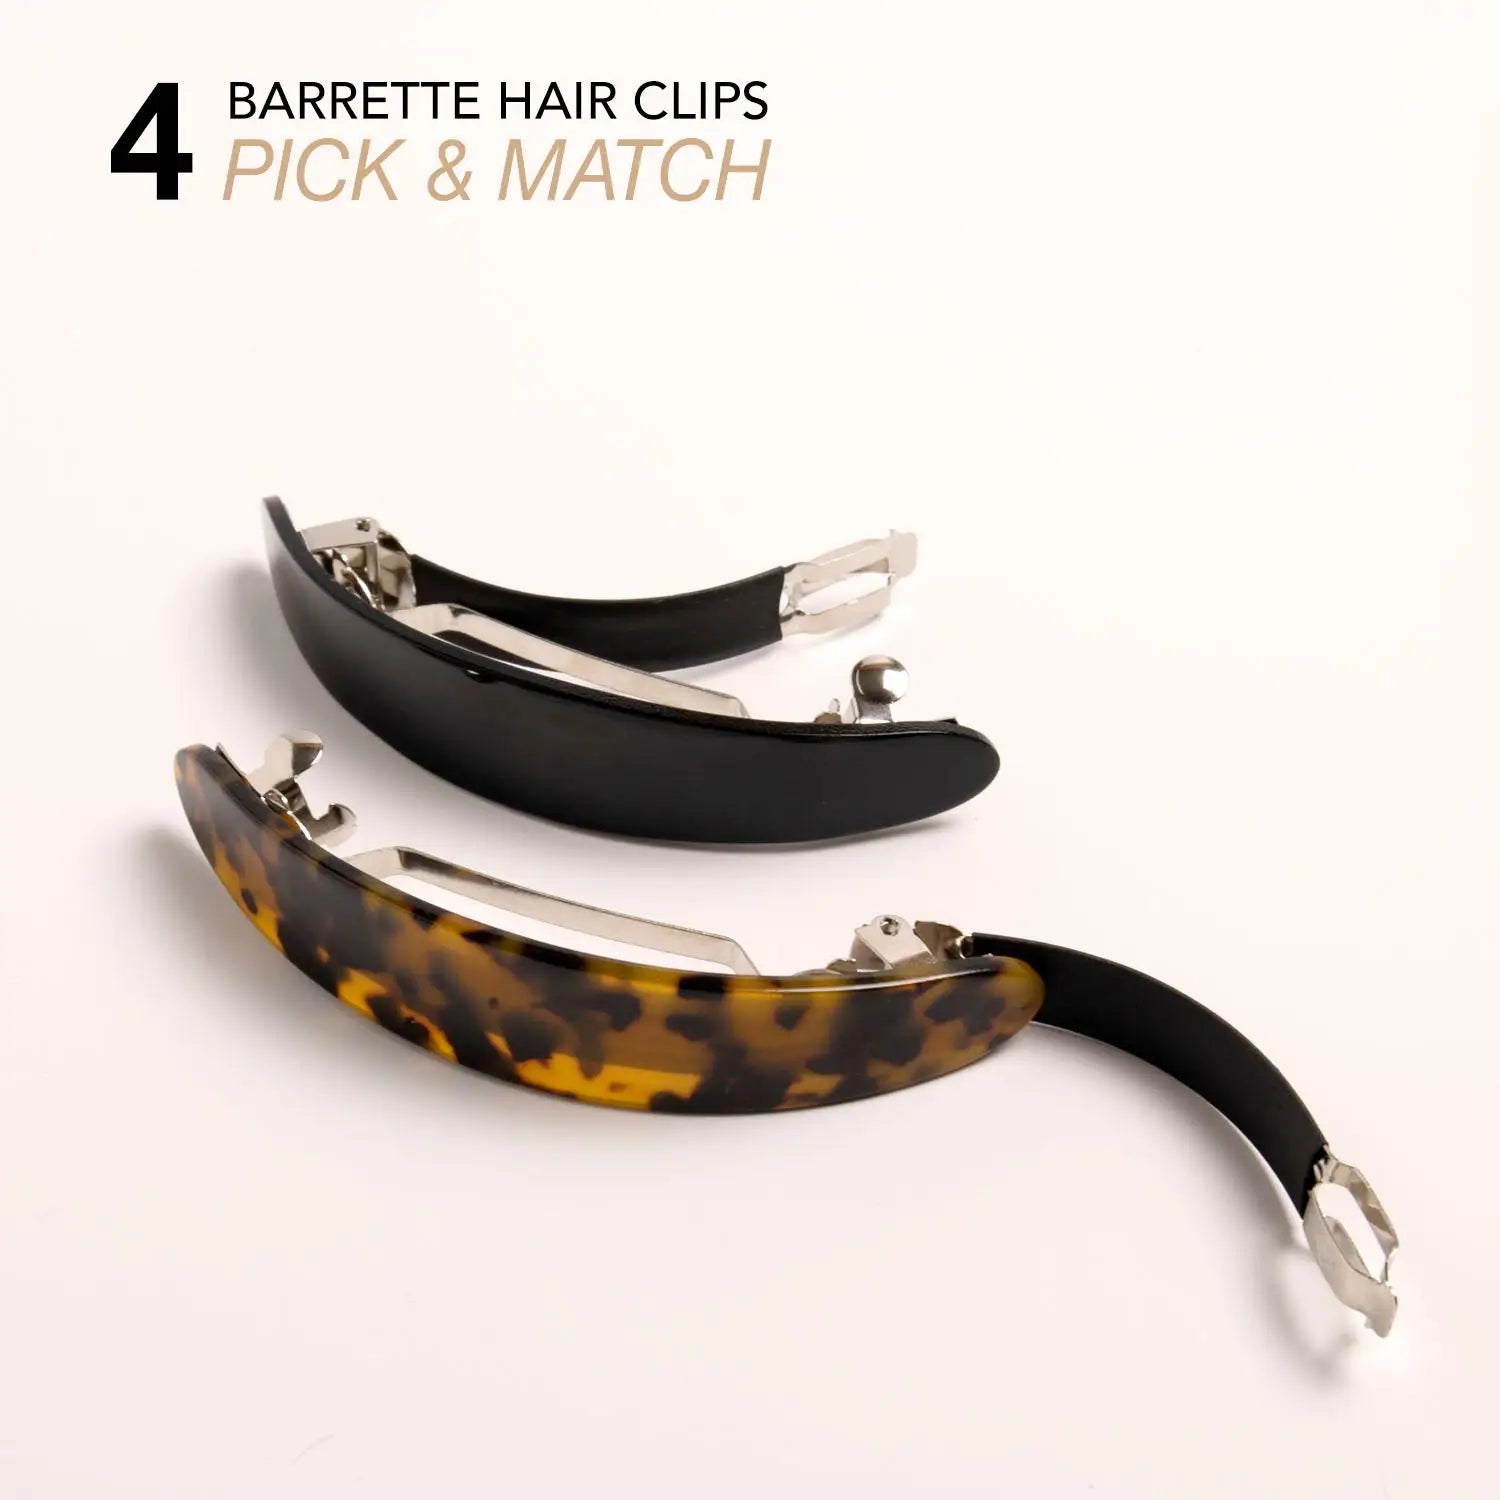 4-piece hair clip set with various types of french barrettes on white background